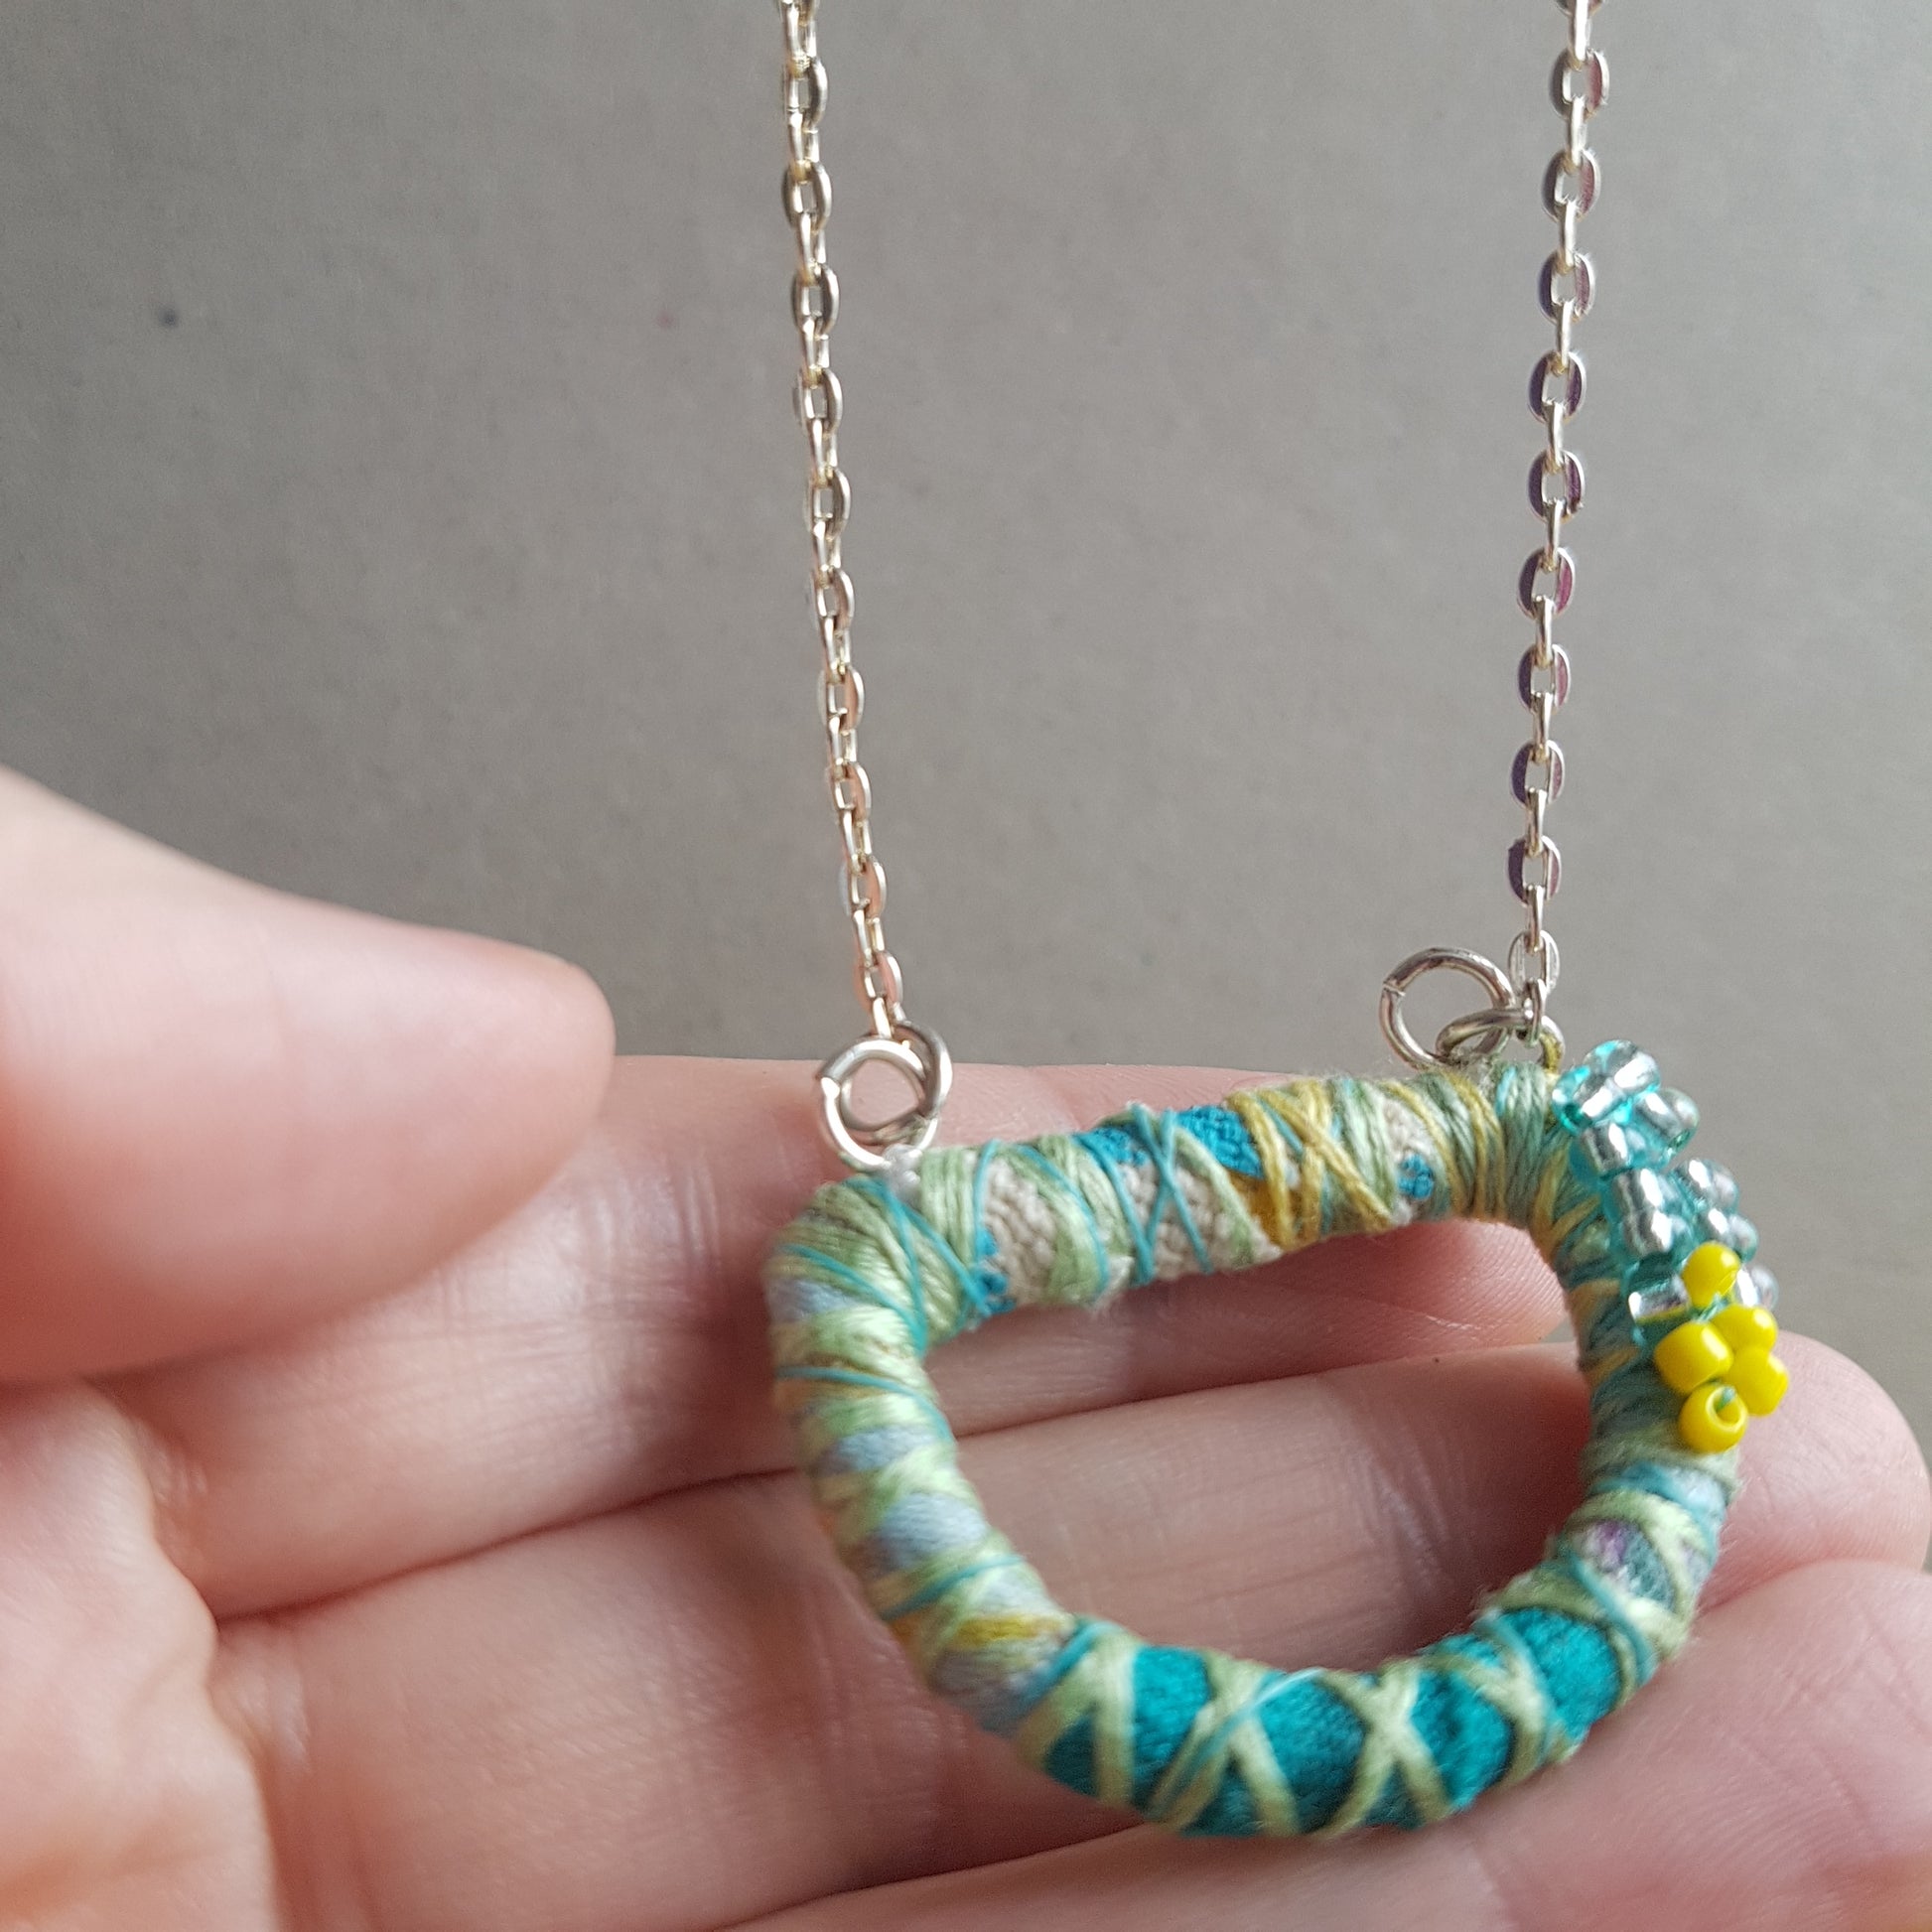 Detail of textile art necklace being held up the the camera by a white hand. There are lemon yellow seed bead embellishments and green threads wrapped around a D ring shaped pendant.